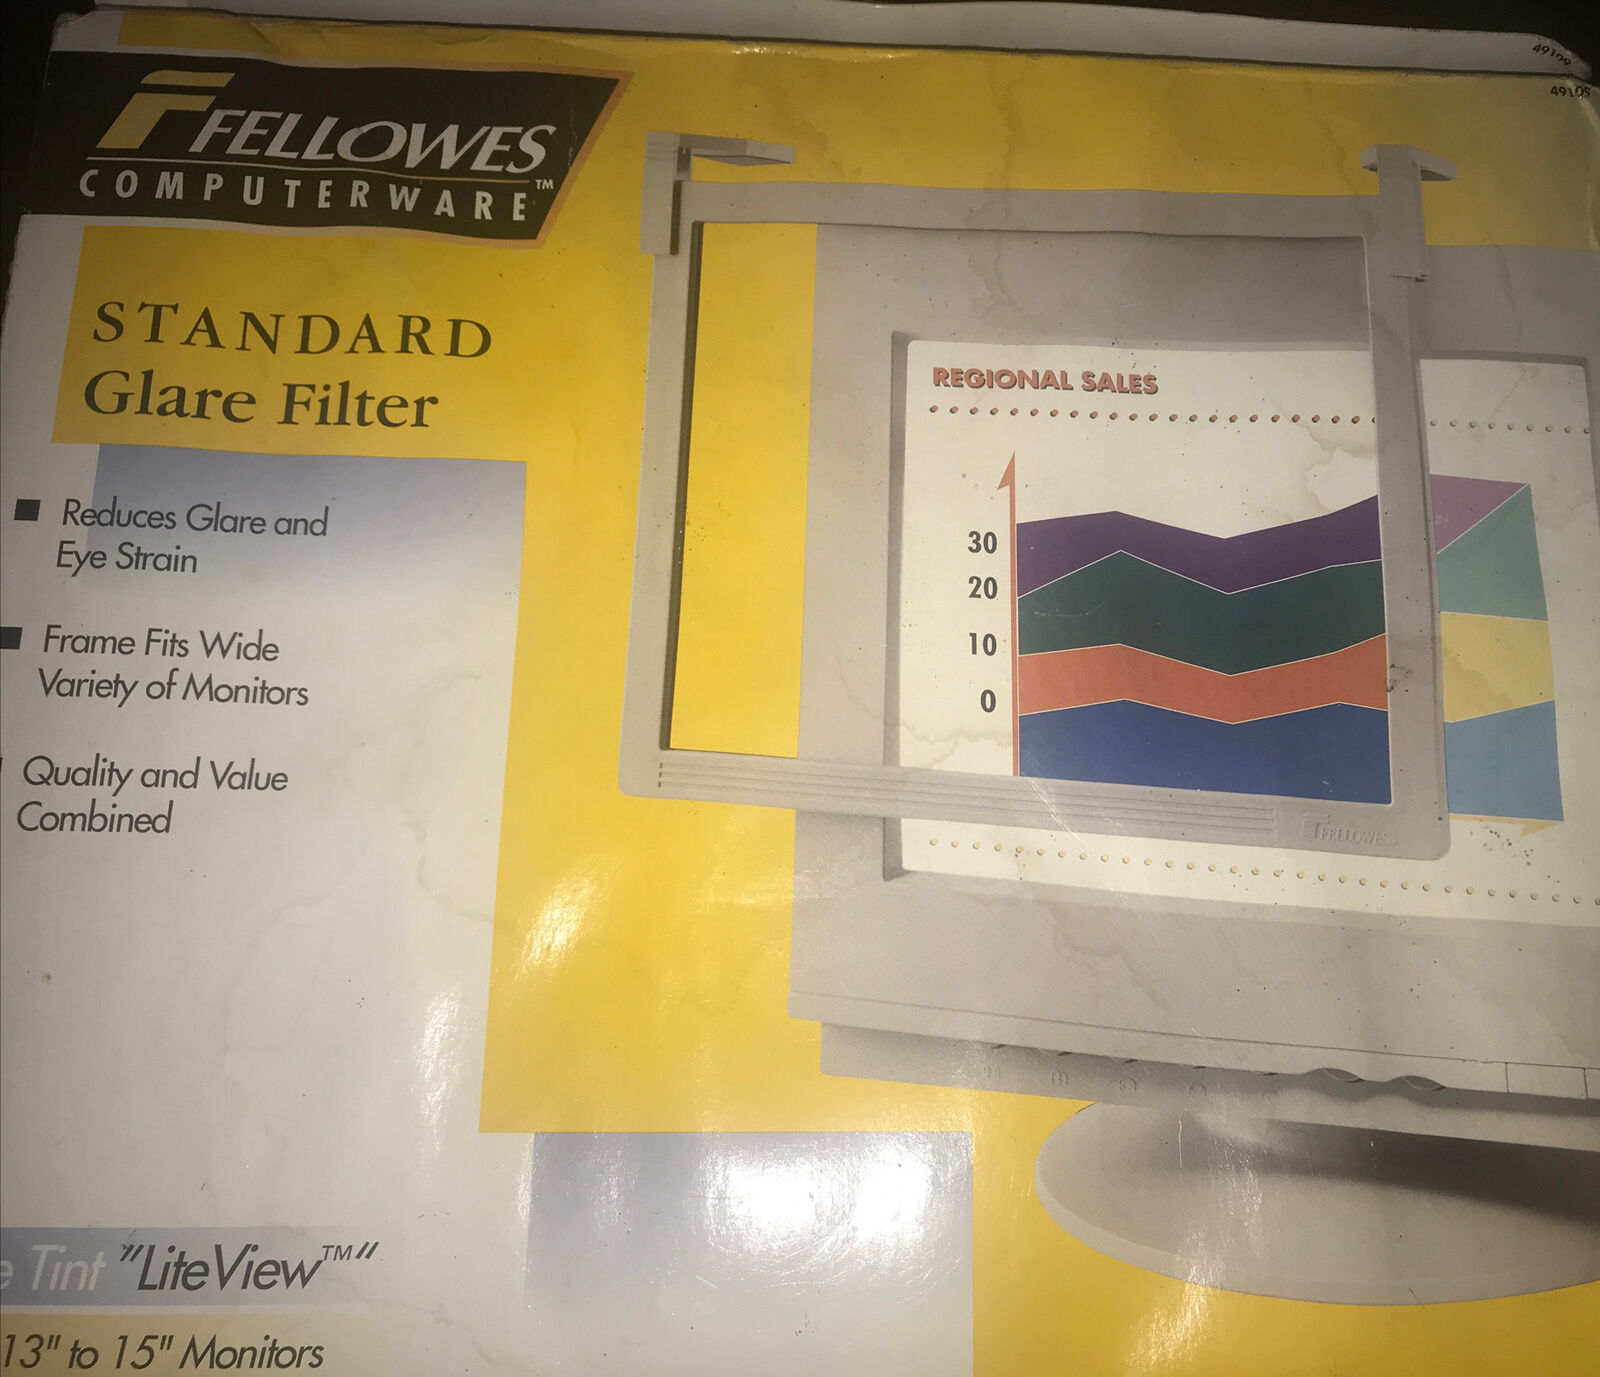 Fellowes Computerware Standard Glare Filter. Fits 13 to 15 inch Monitors